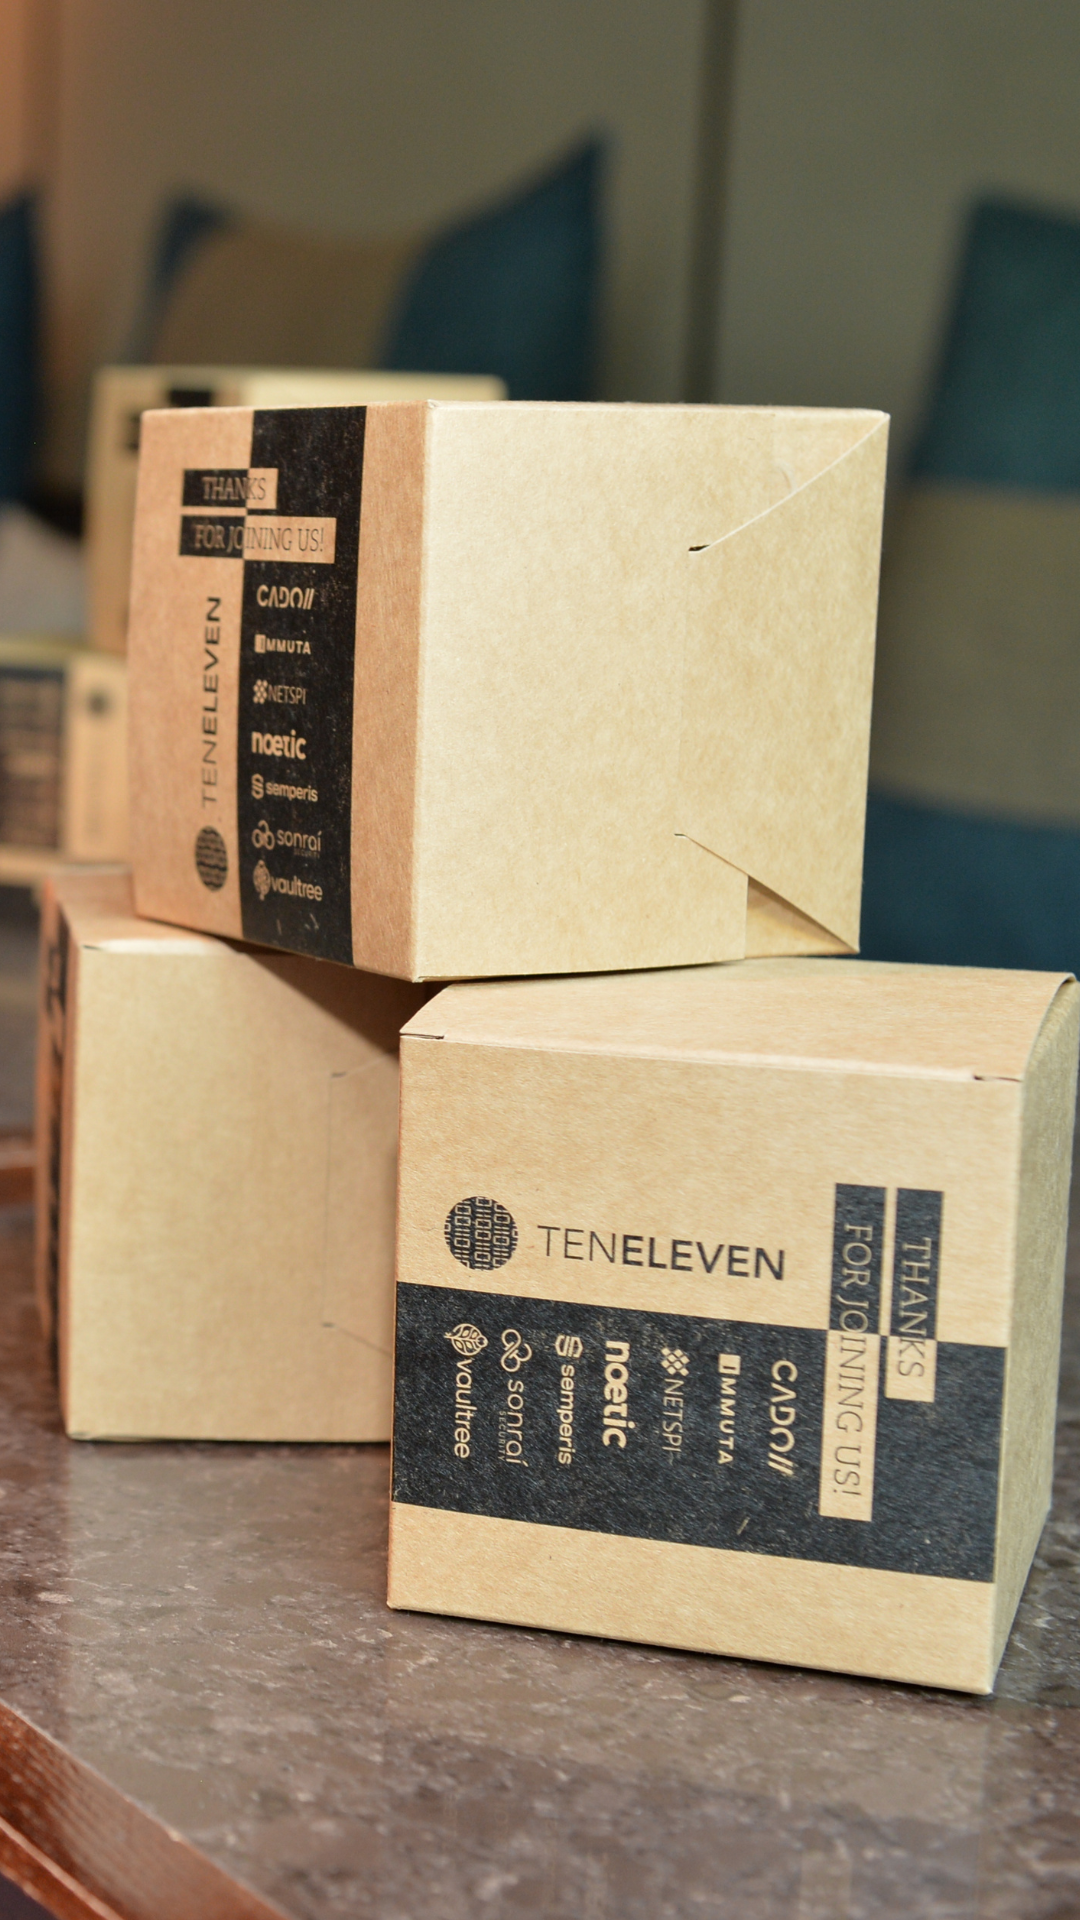 TenEleven thank you gift boxes